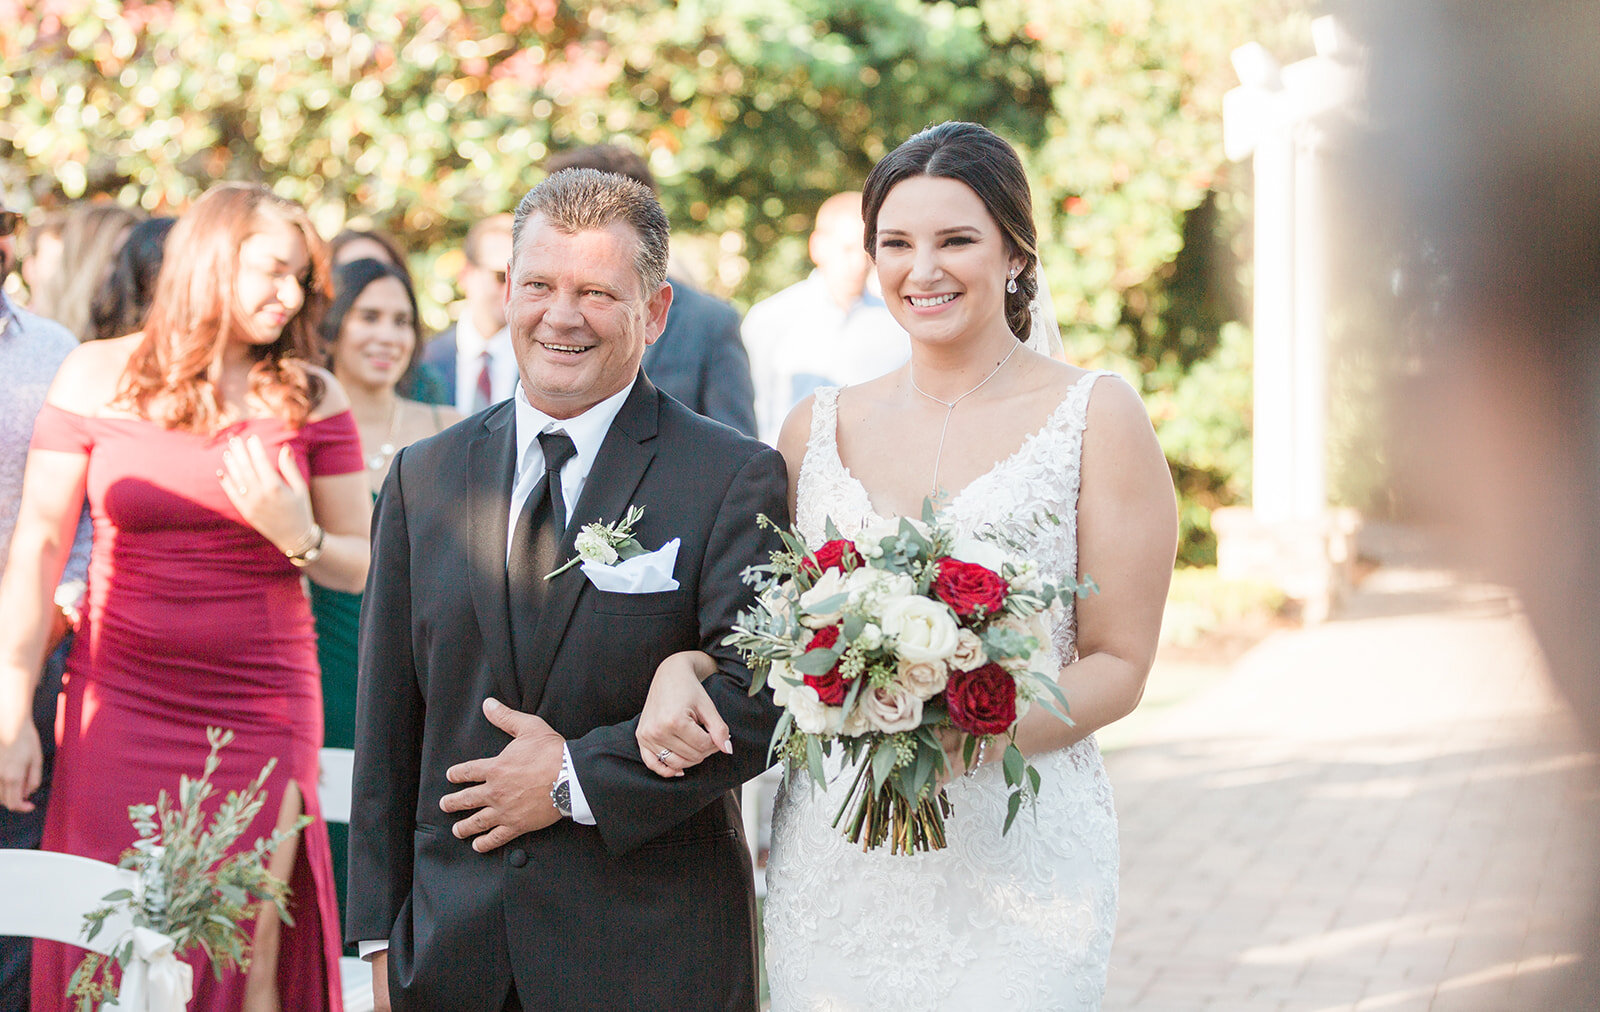 Bluegrass Chic - The Hendricks Photography at Royal Crest Room Father walking his daughter down the aisle burgundy white green bridal bouquet